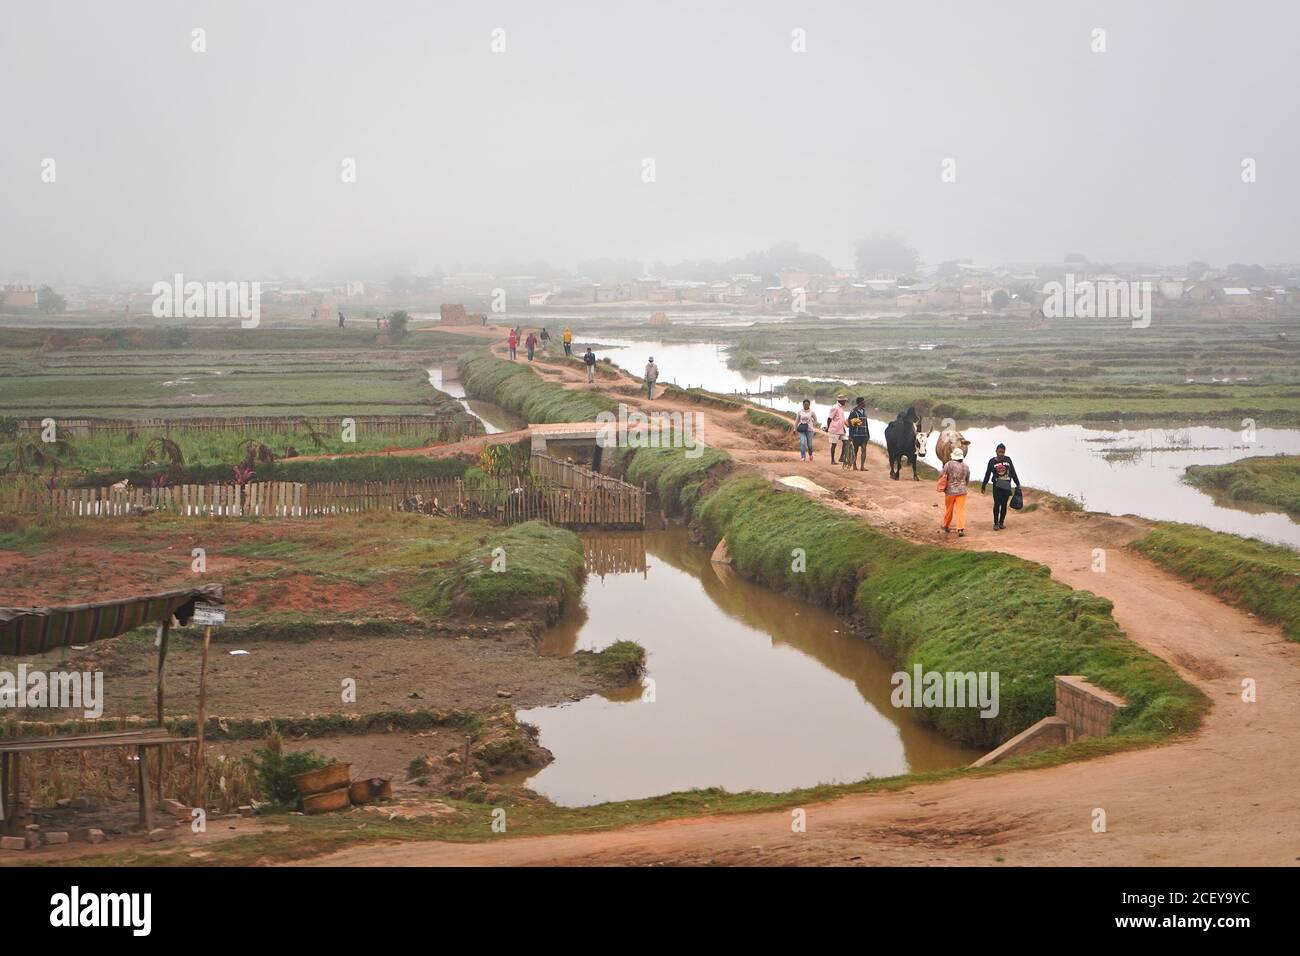 Antananarivo, Madagascar - May 07, 2019: Unknown Malagasy people and their zebu cattle walking over muddy flooded rice fields through clay road, fog i Stock Photo